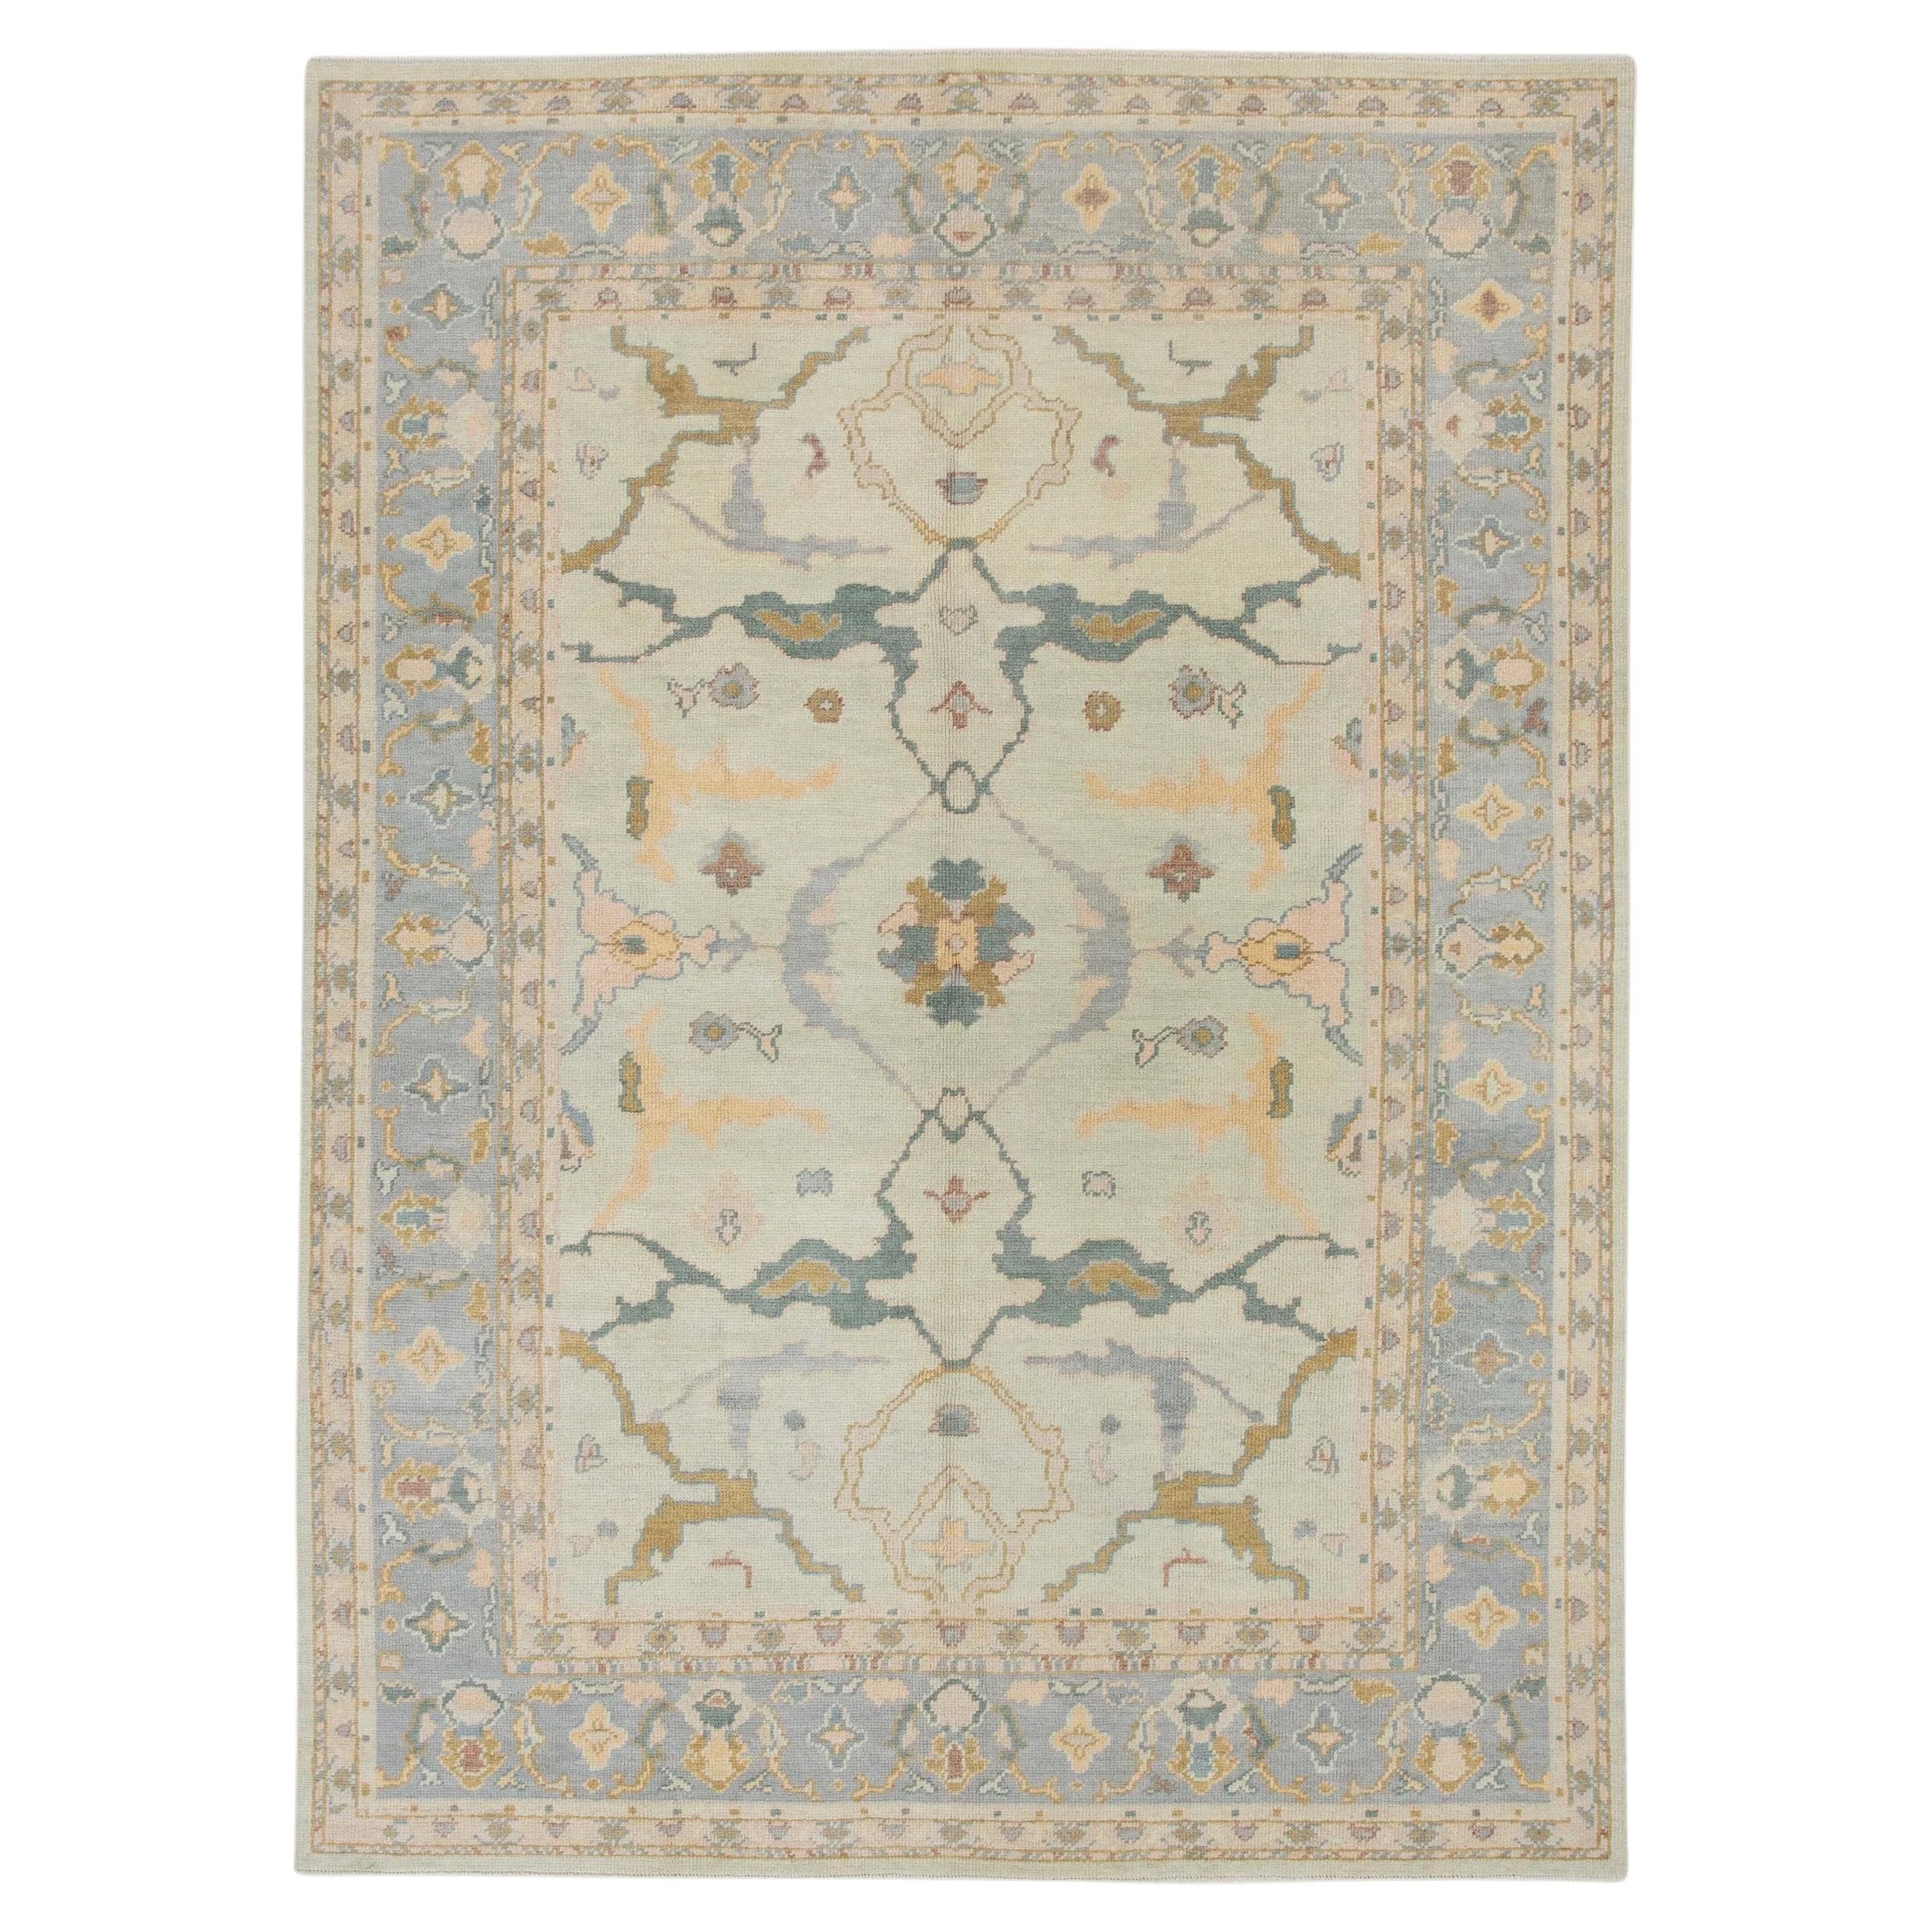 Pink & Blue Floral Handwoven Wool Turkish Oushak Rug 6'10" x 9'8" For Sale